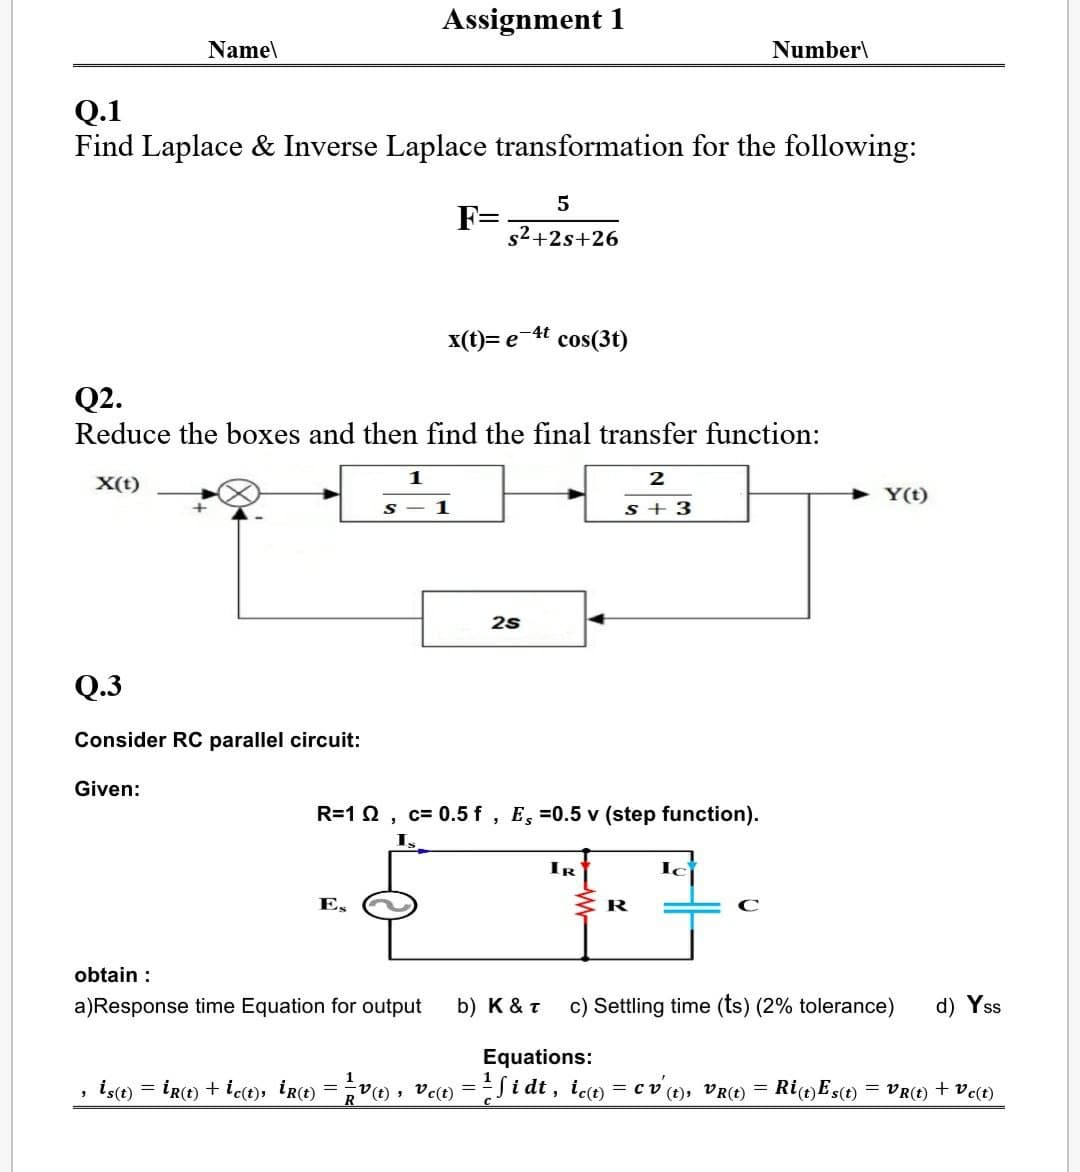 Assignment 1
Name\
Number\
Q.1
Find Laplace & Inverse Laplace transformation for the following:
5
F=
s2+2s+26
x(t)= e 4t cos(3t)
Q2.
Reduce the boxes and then find the final transfer function:
1
2
X(t)
Y(t)
1
s + 3
25
Q.3
Consider RC parallel circuit:
Given:
R=1 0, c= 0.5 f , E, =0.5 v (step function).
IR
E,
obtain :
a)Response time Equation for output
b) K & T
c) Settling time (ts) (2% tolerance)
d) Yss
Equations:
is(e) = IR(t) + iet), ire) = V vc-i dt, ico = cv (), VR) = RIE5(t) = VR(E) + Vc(t)
